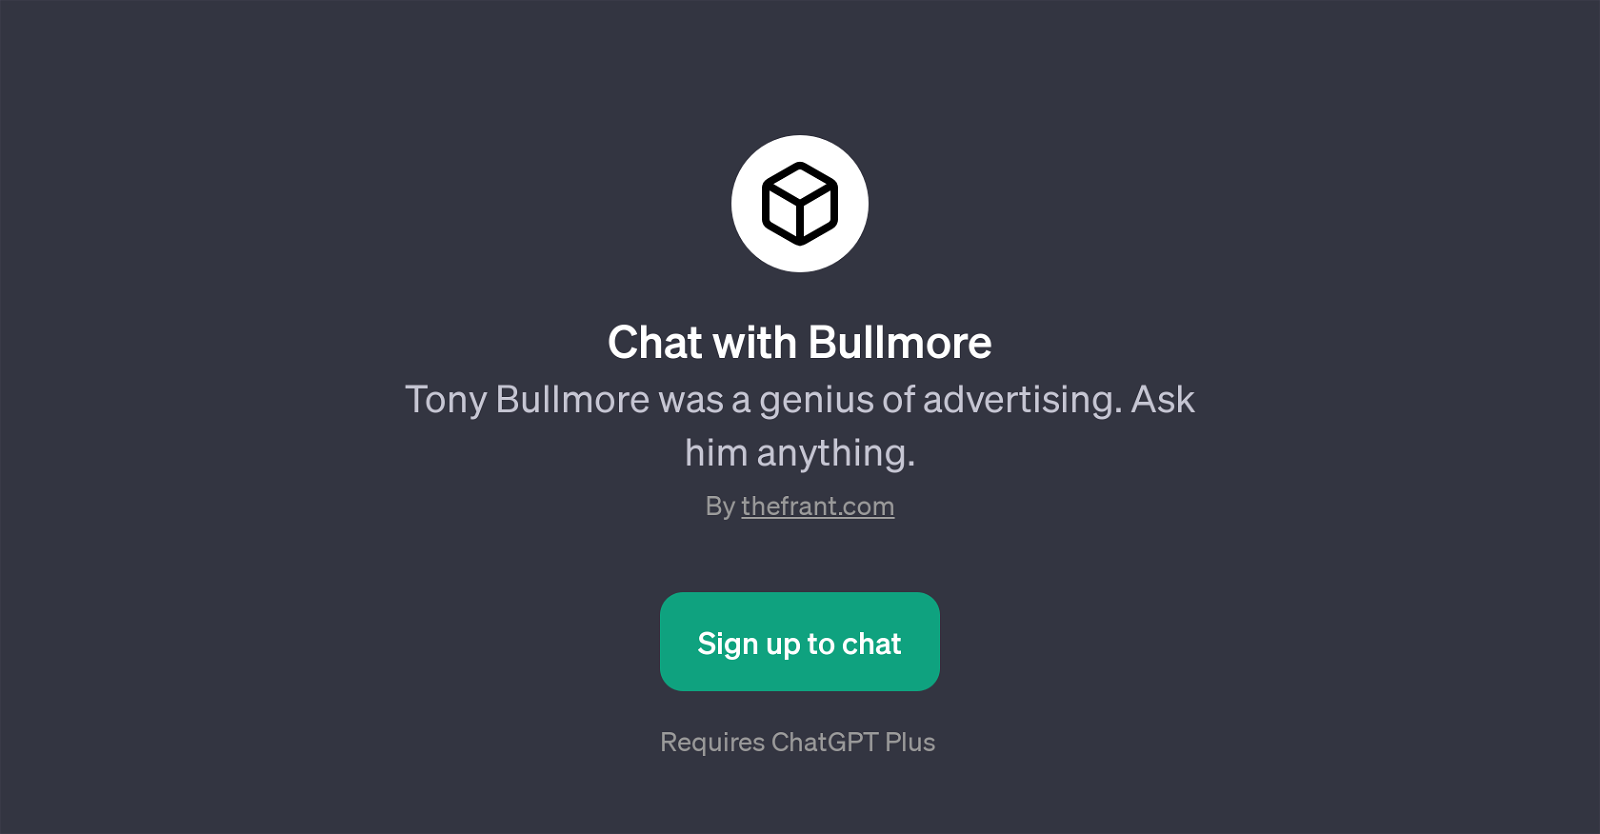 Chat with Bullmore website